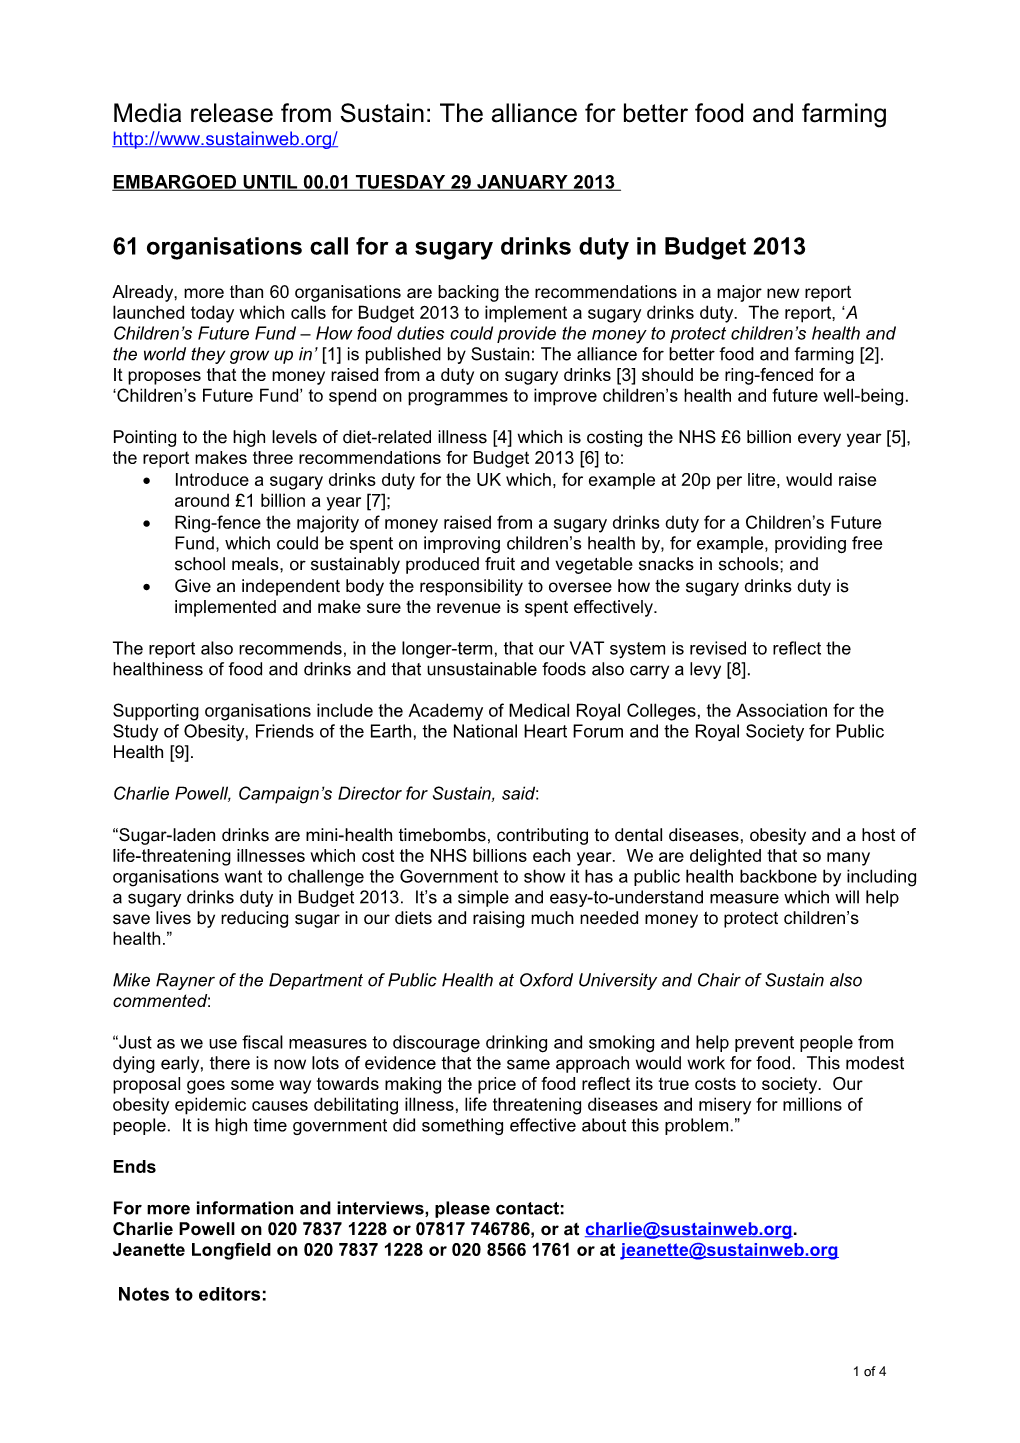 Media Release from the Children S Food Campaign